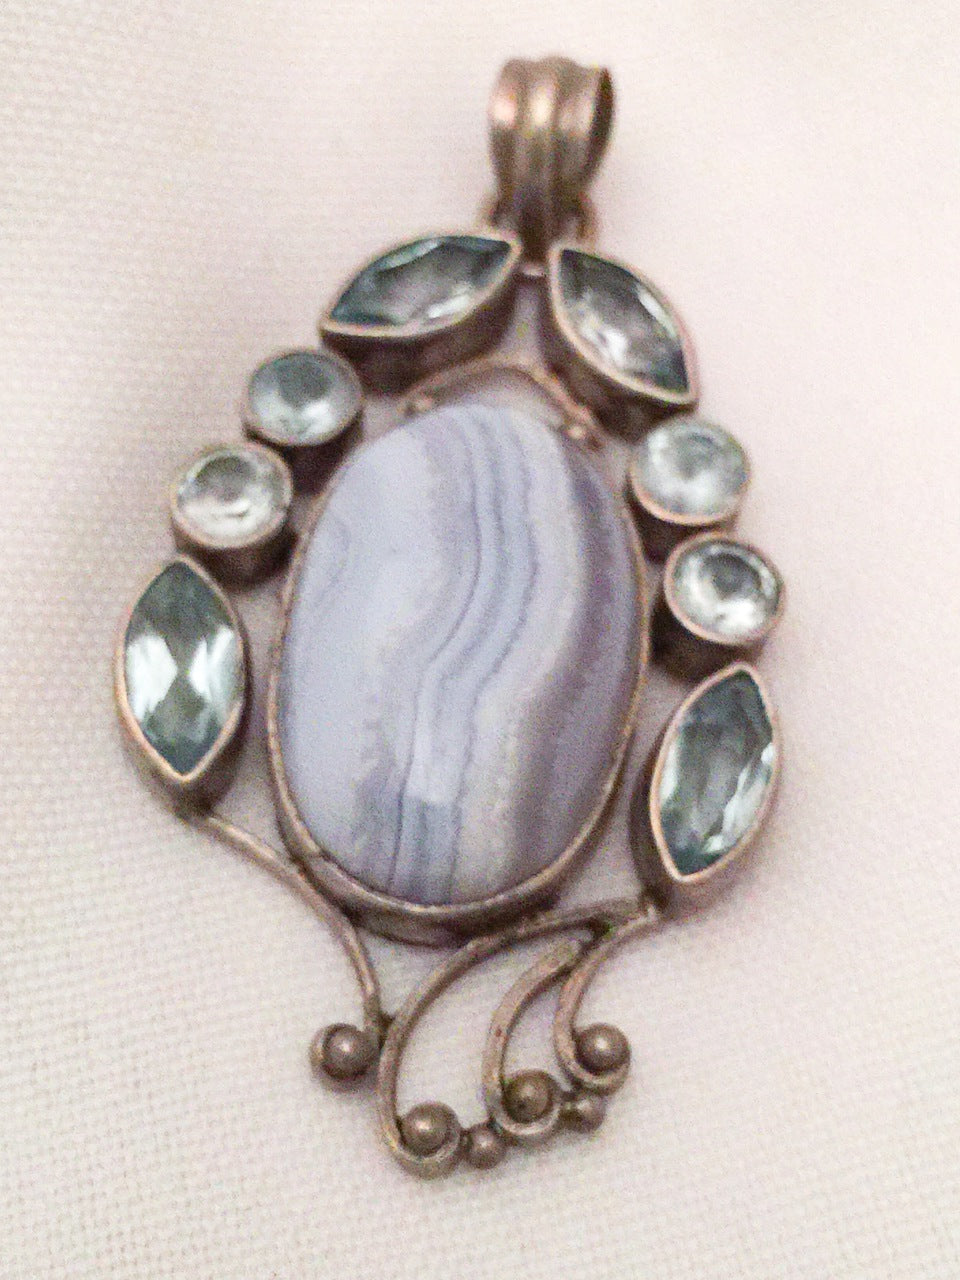 Blue Lace Agate Pendant w Pale Blue Stones in Sterling Silver